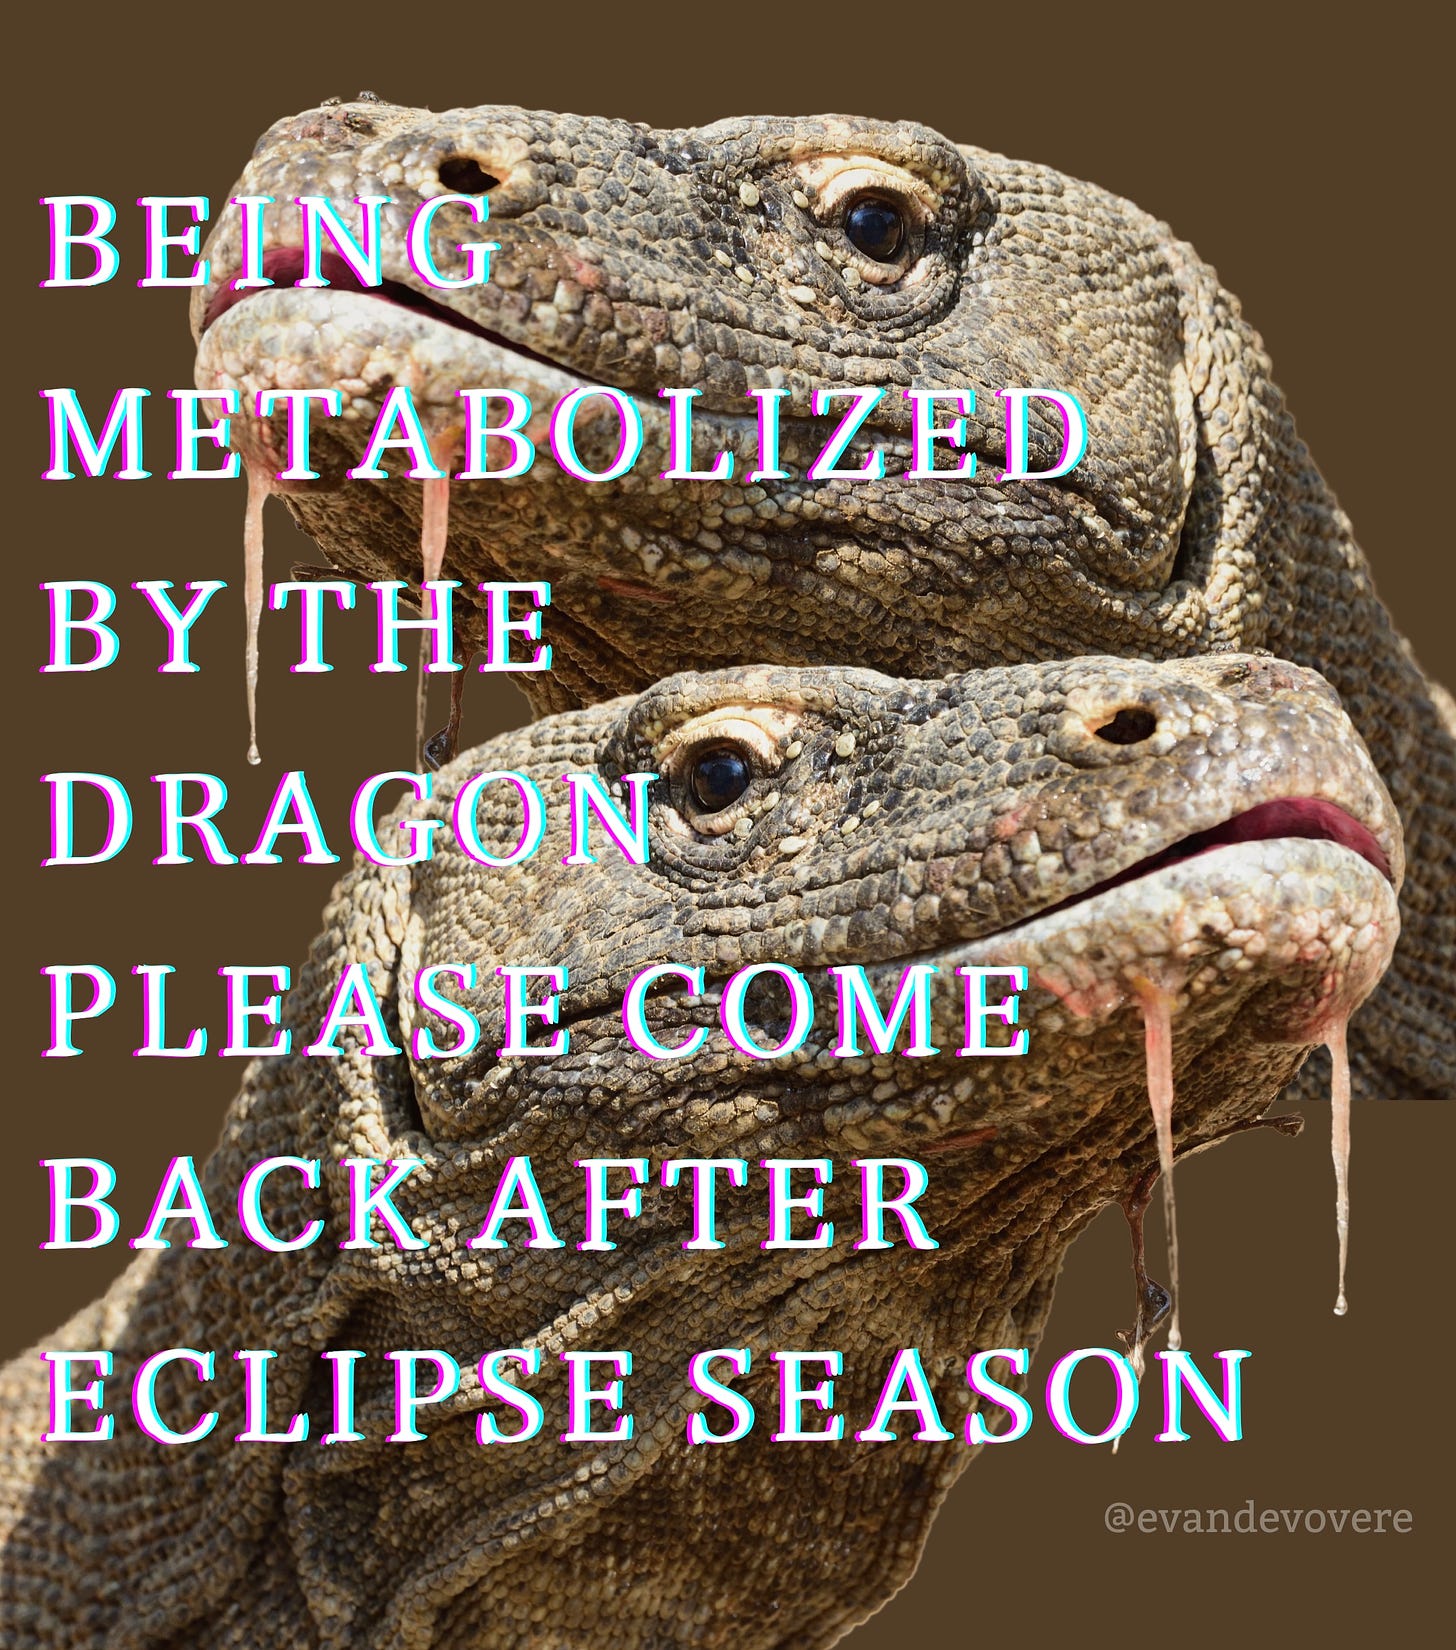 Image of a Komodo Dragon lizard’s head which is duplicated so there are two of the same photo. The lizard has red goo coming from its mouth as if it has just freshly eaten something. Text over the lizard reads: “BEING METABOLIZED BY THE DRAGON, PLEASE COME BACK AFTER ECLIPSE SEASON”